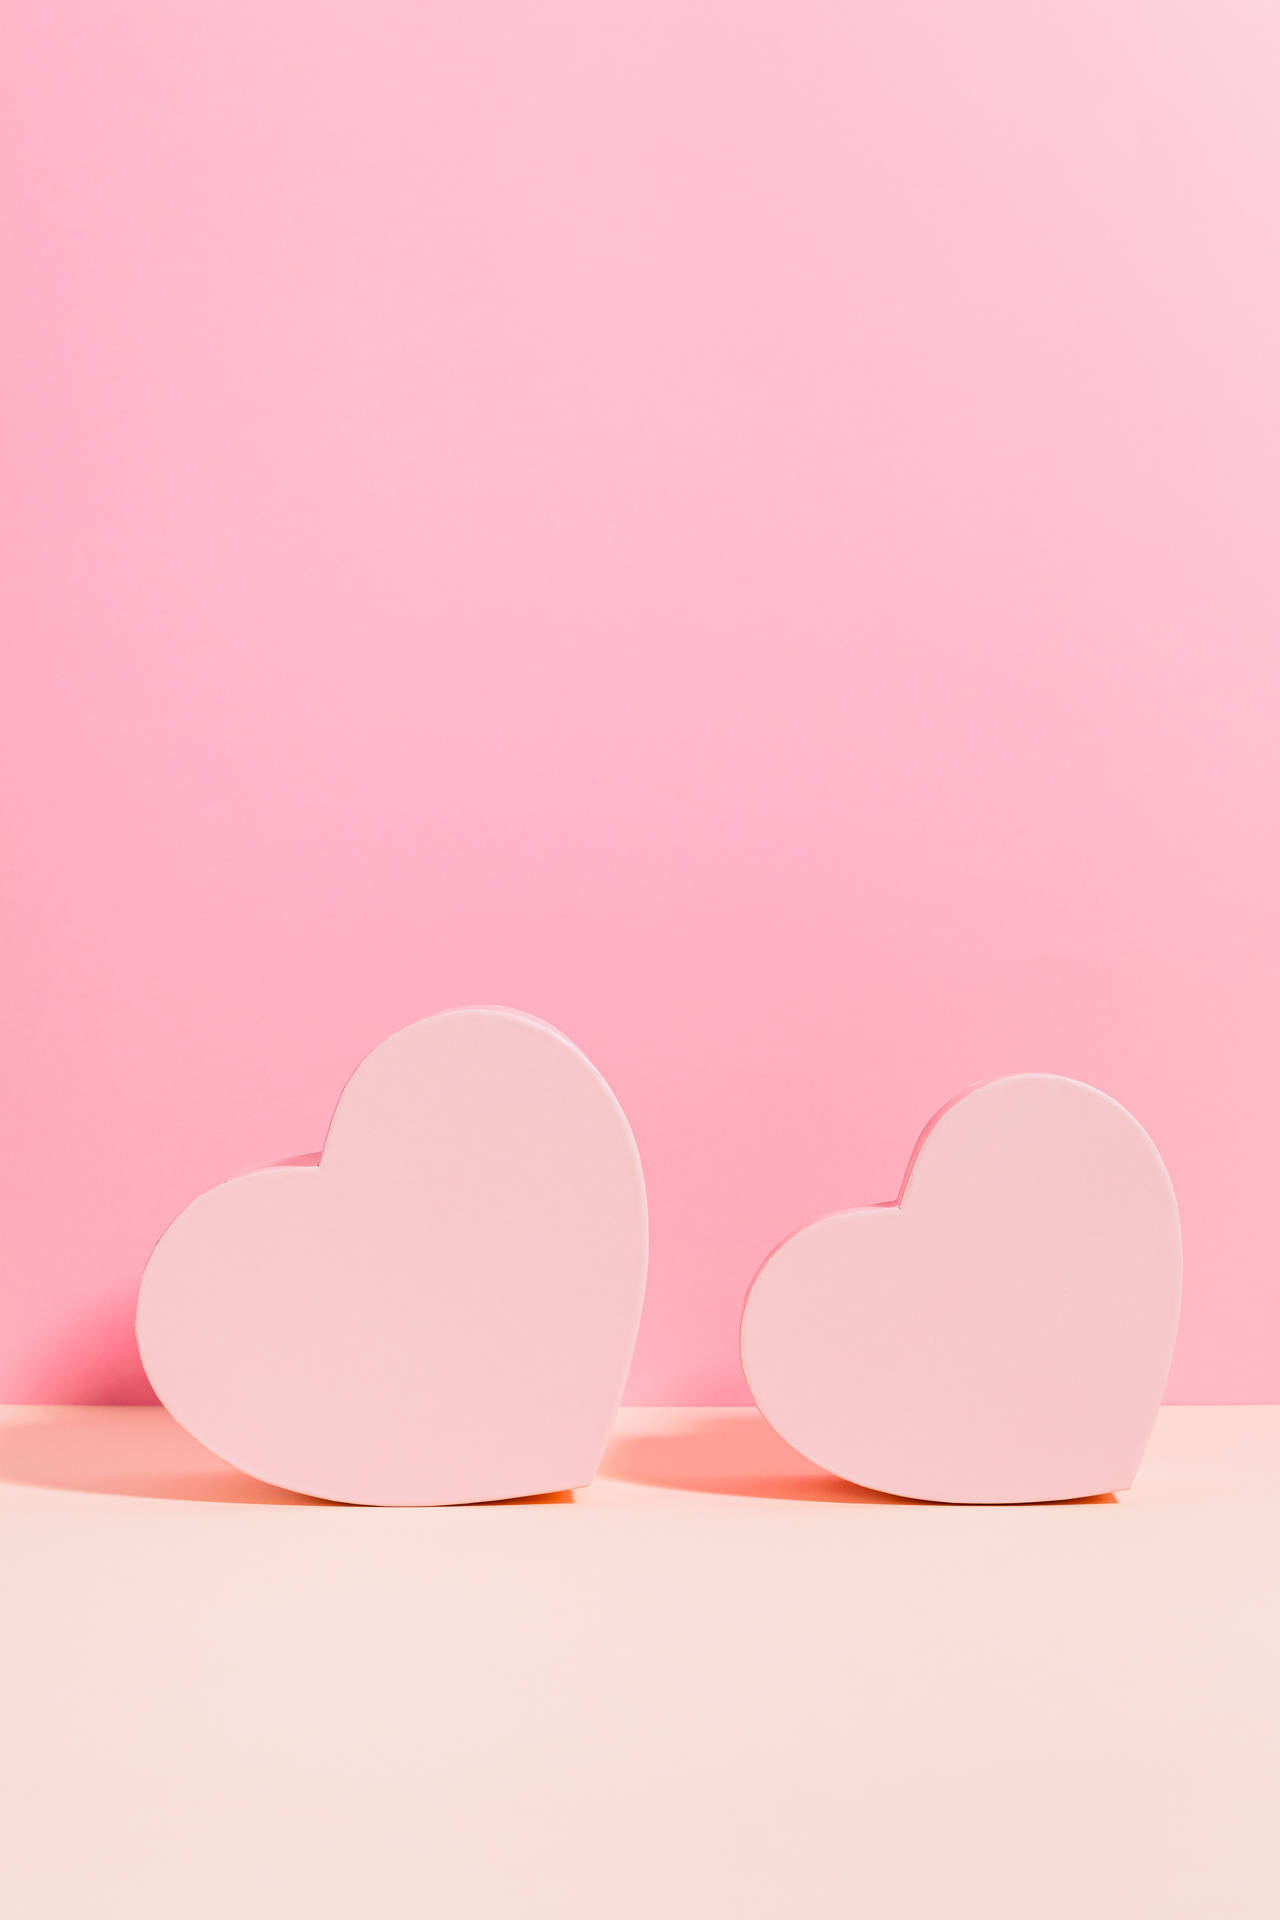 Pastel Pink Heart Boxes